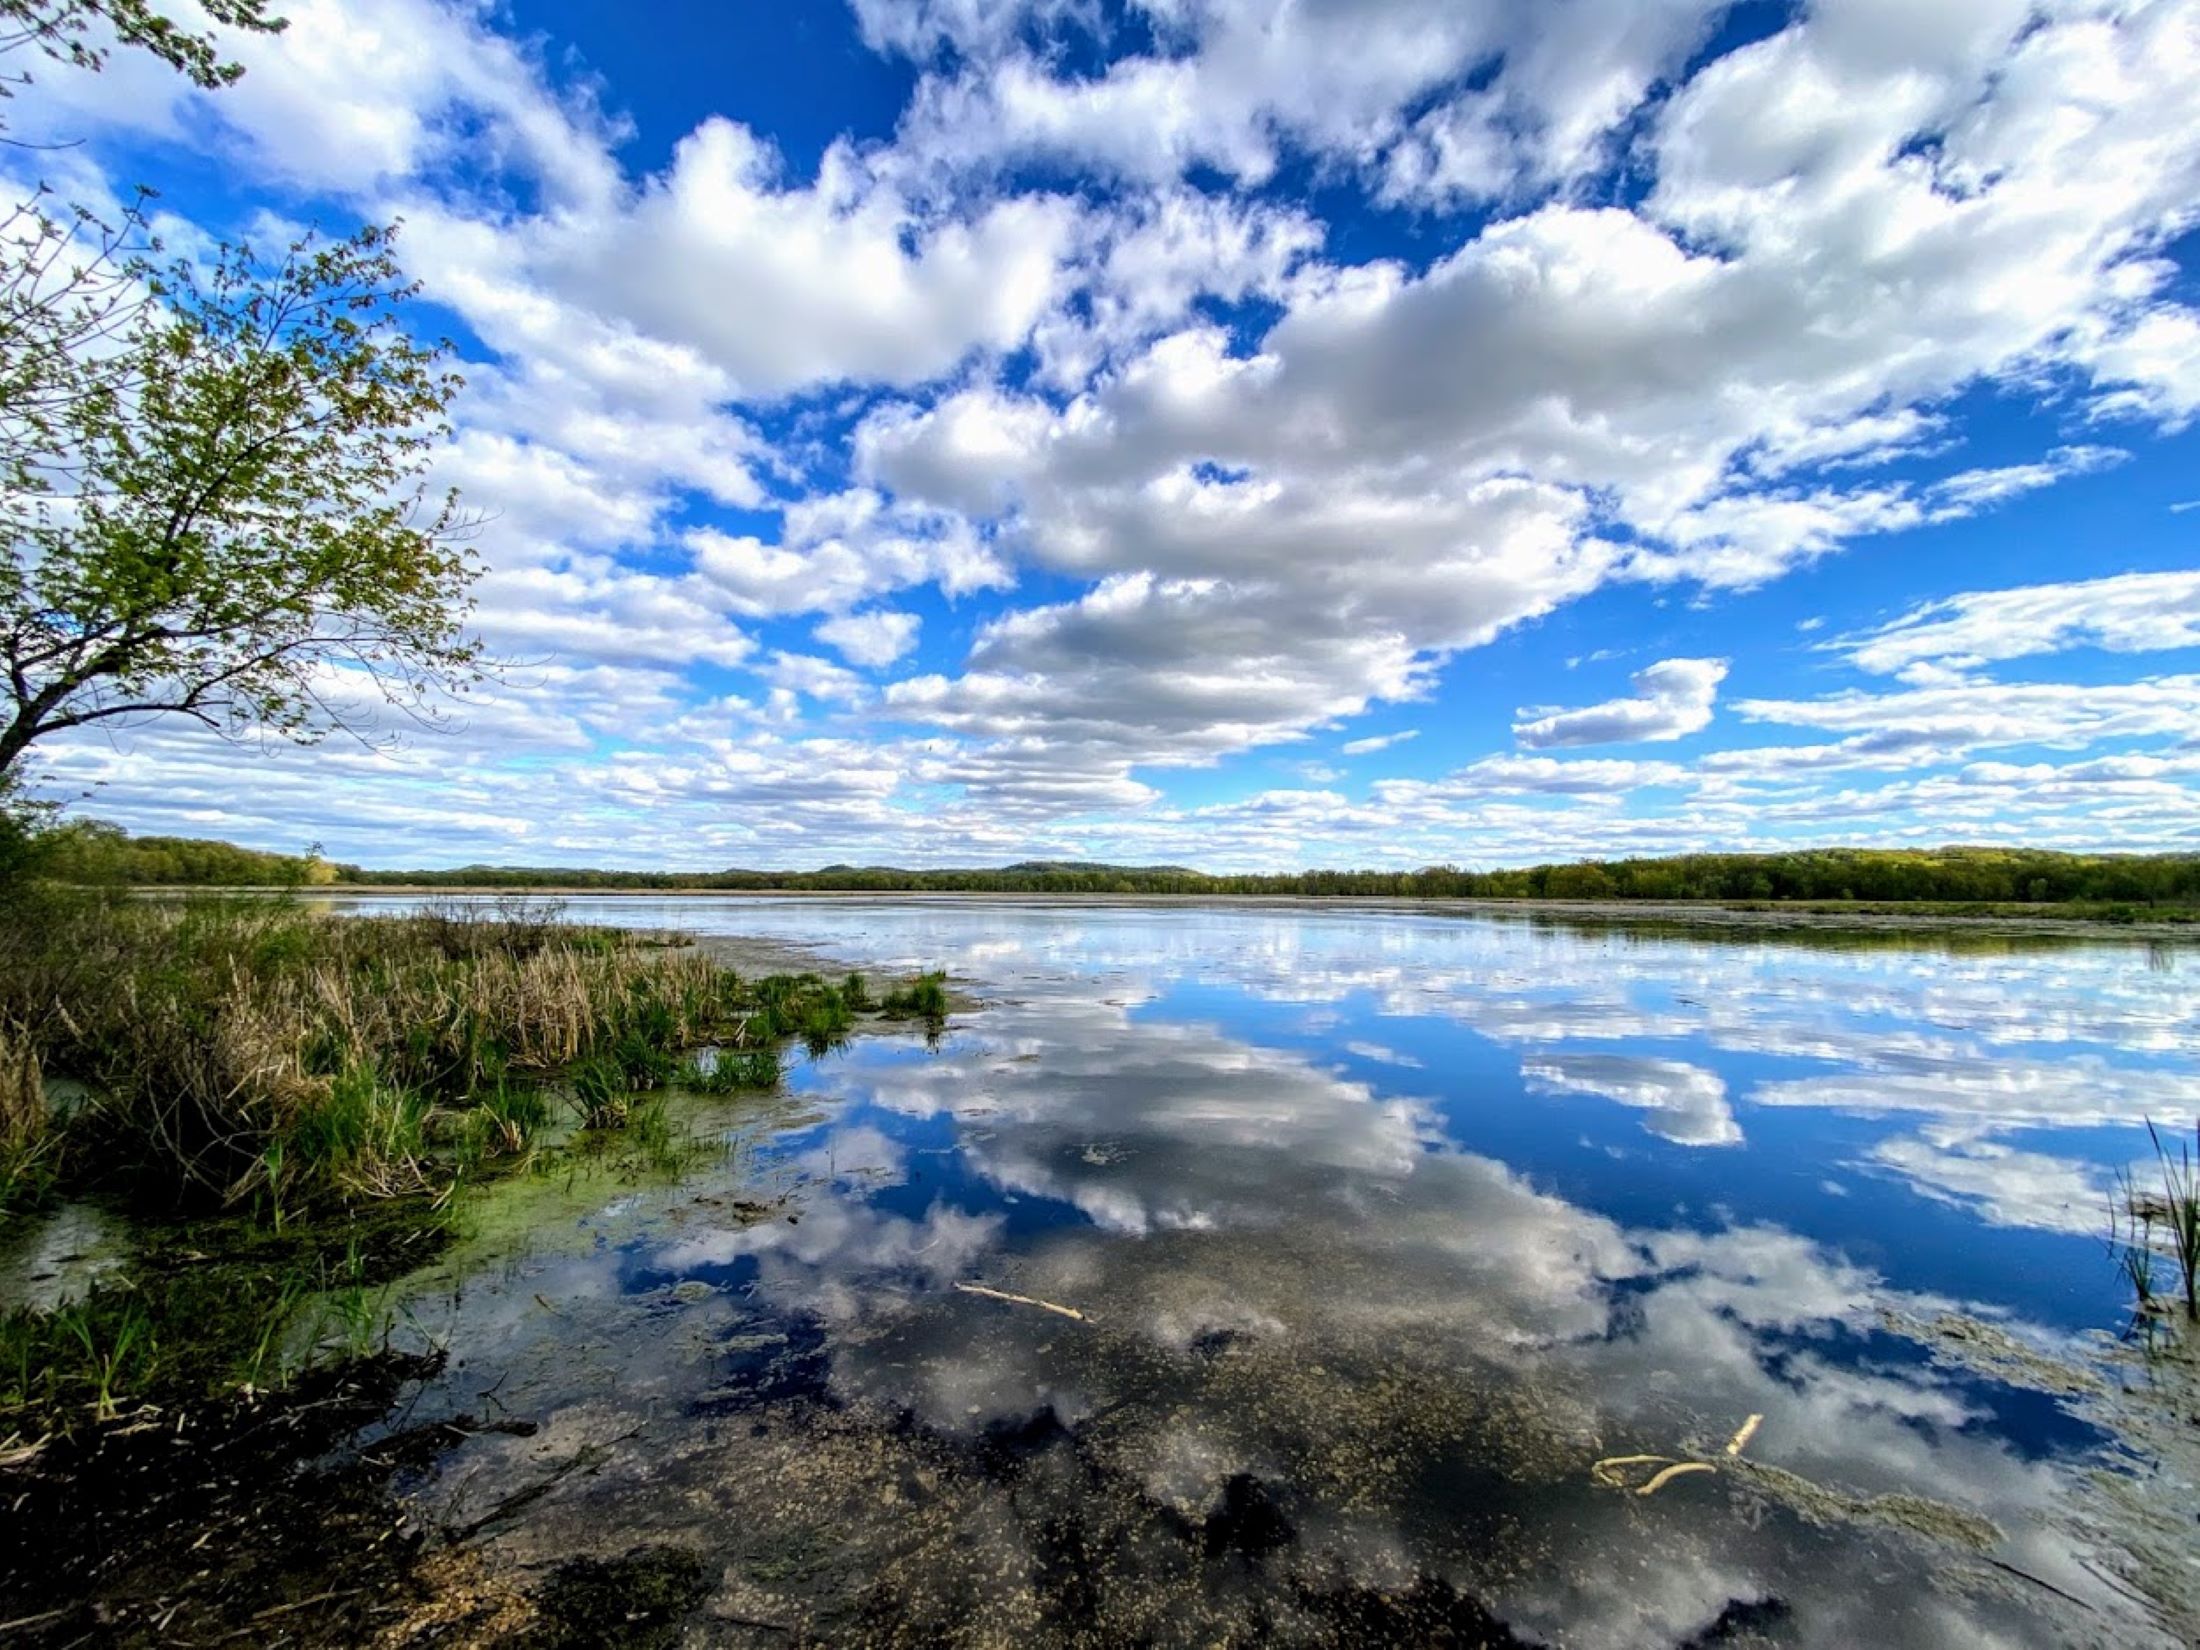 Clouds reflected over the lake in Sauk County, Wisconsin